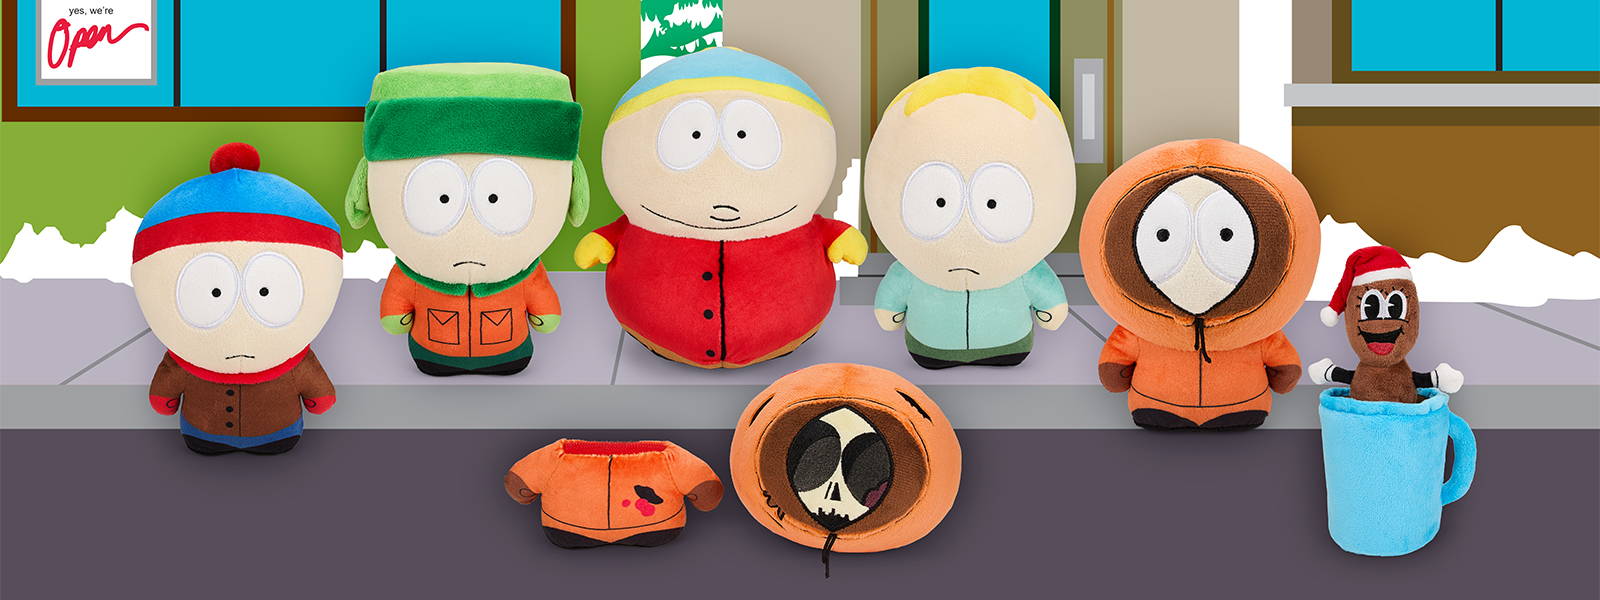 South Park Plush Toy Collectibles from Kidrobot